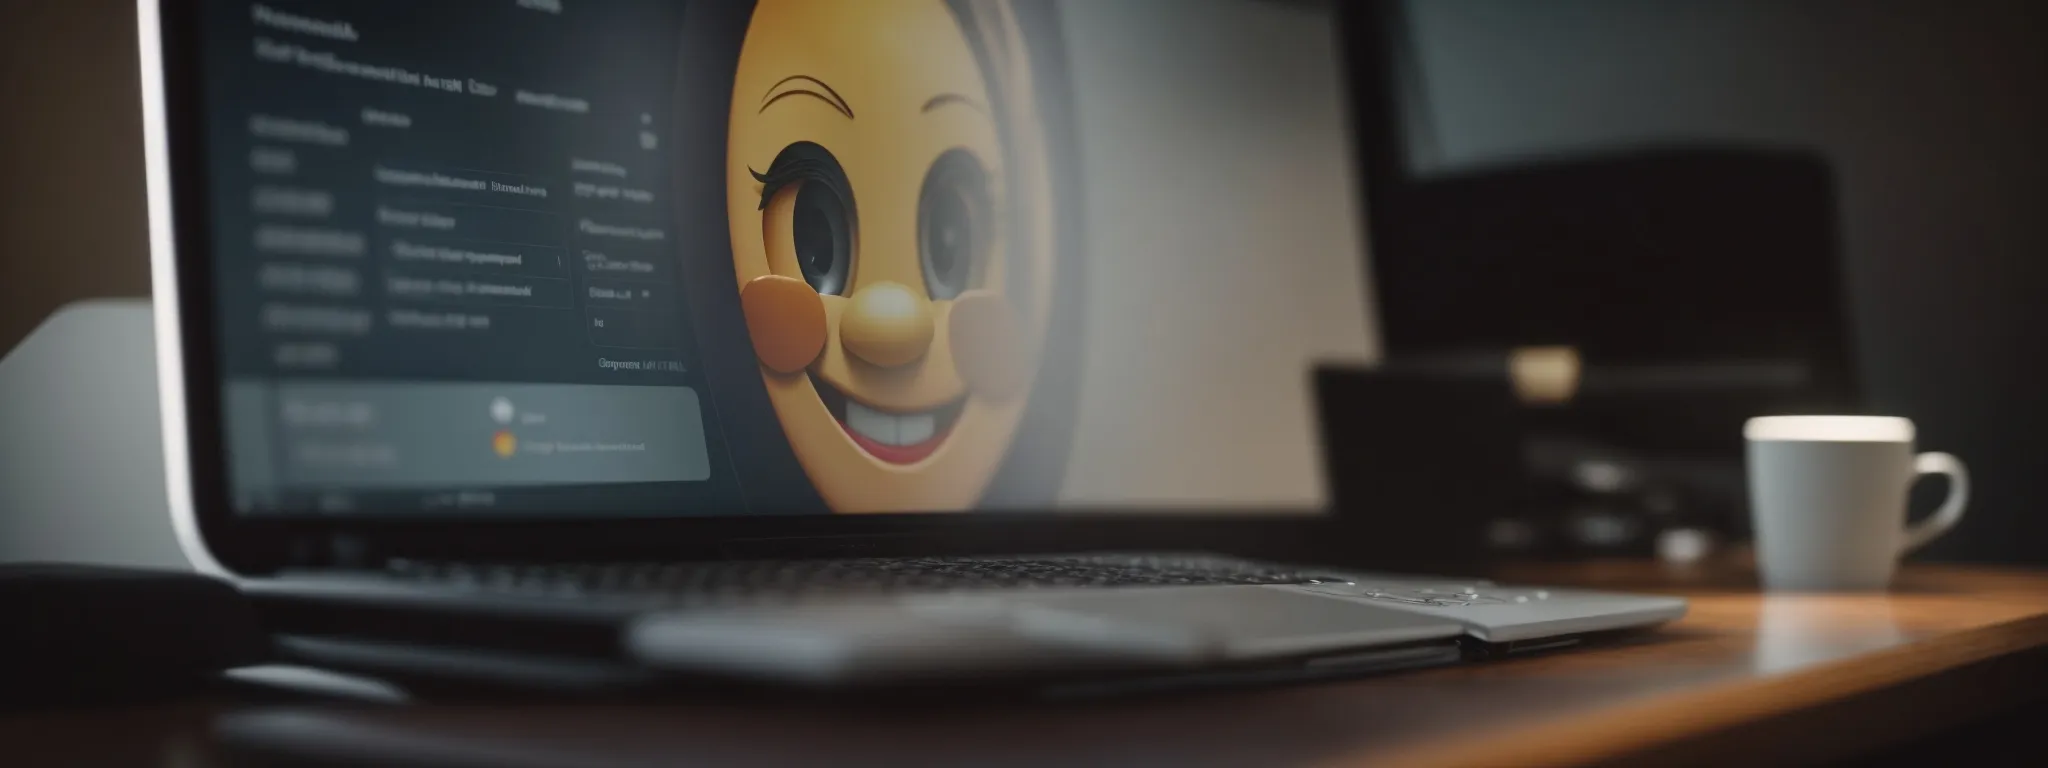 a smiling emoji icon on a computer screen with a simplified website user interface in the background.